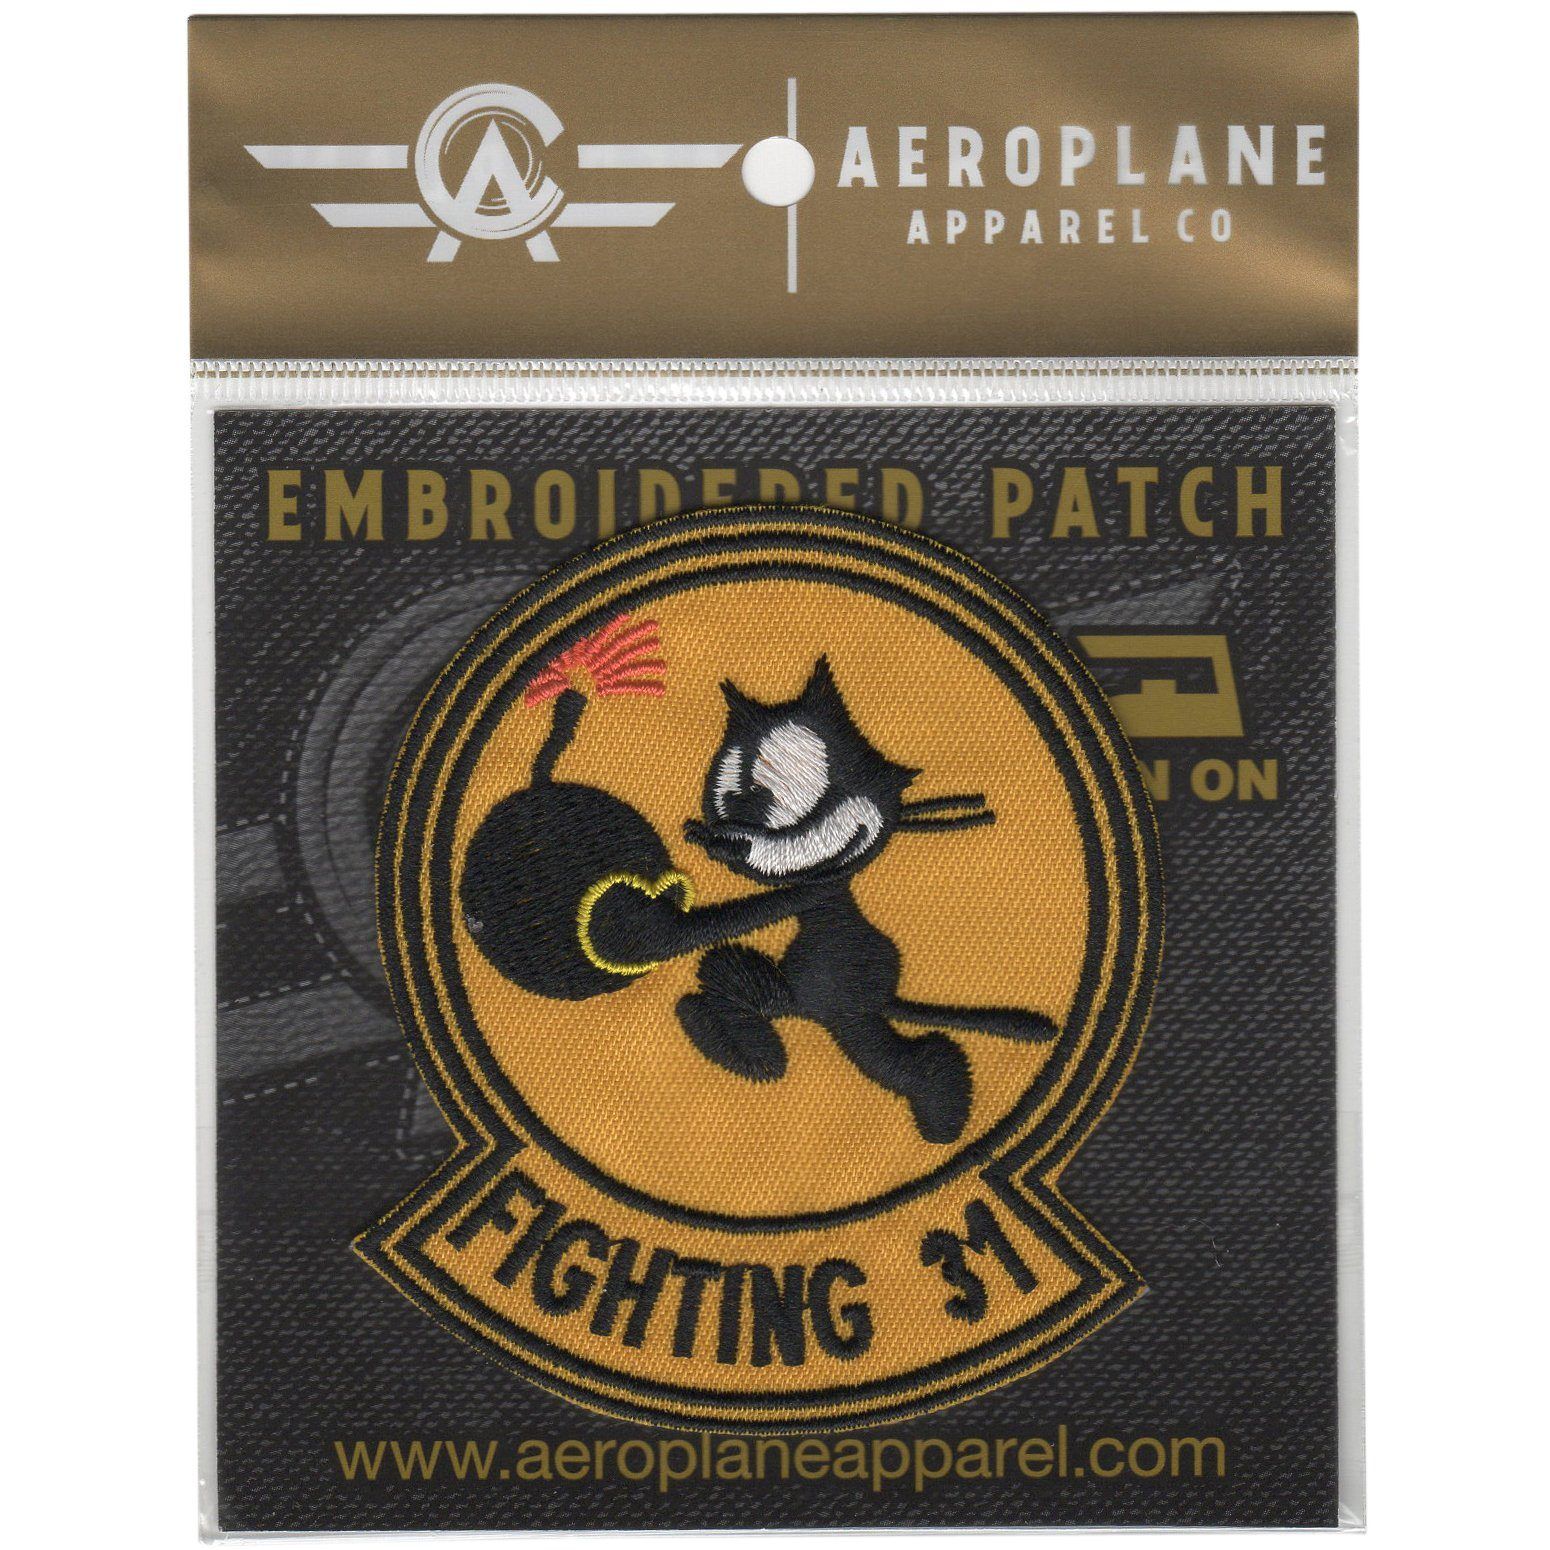 Strike Fighter Squadron 31 (VF-31) - Tomcatters Embroidered Patch (Iron On Application) - PilotMall.com